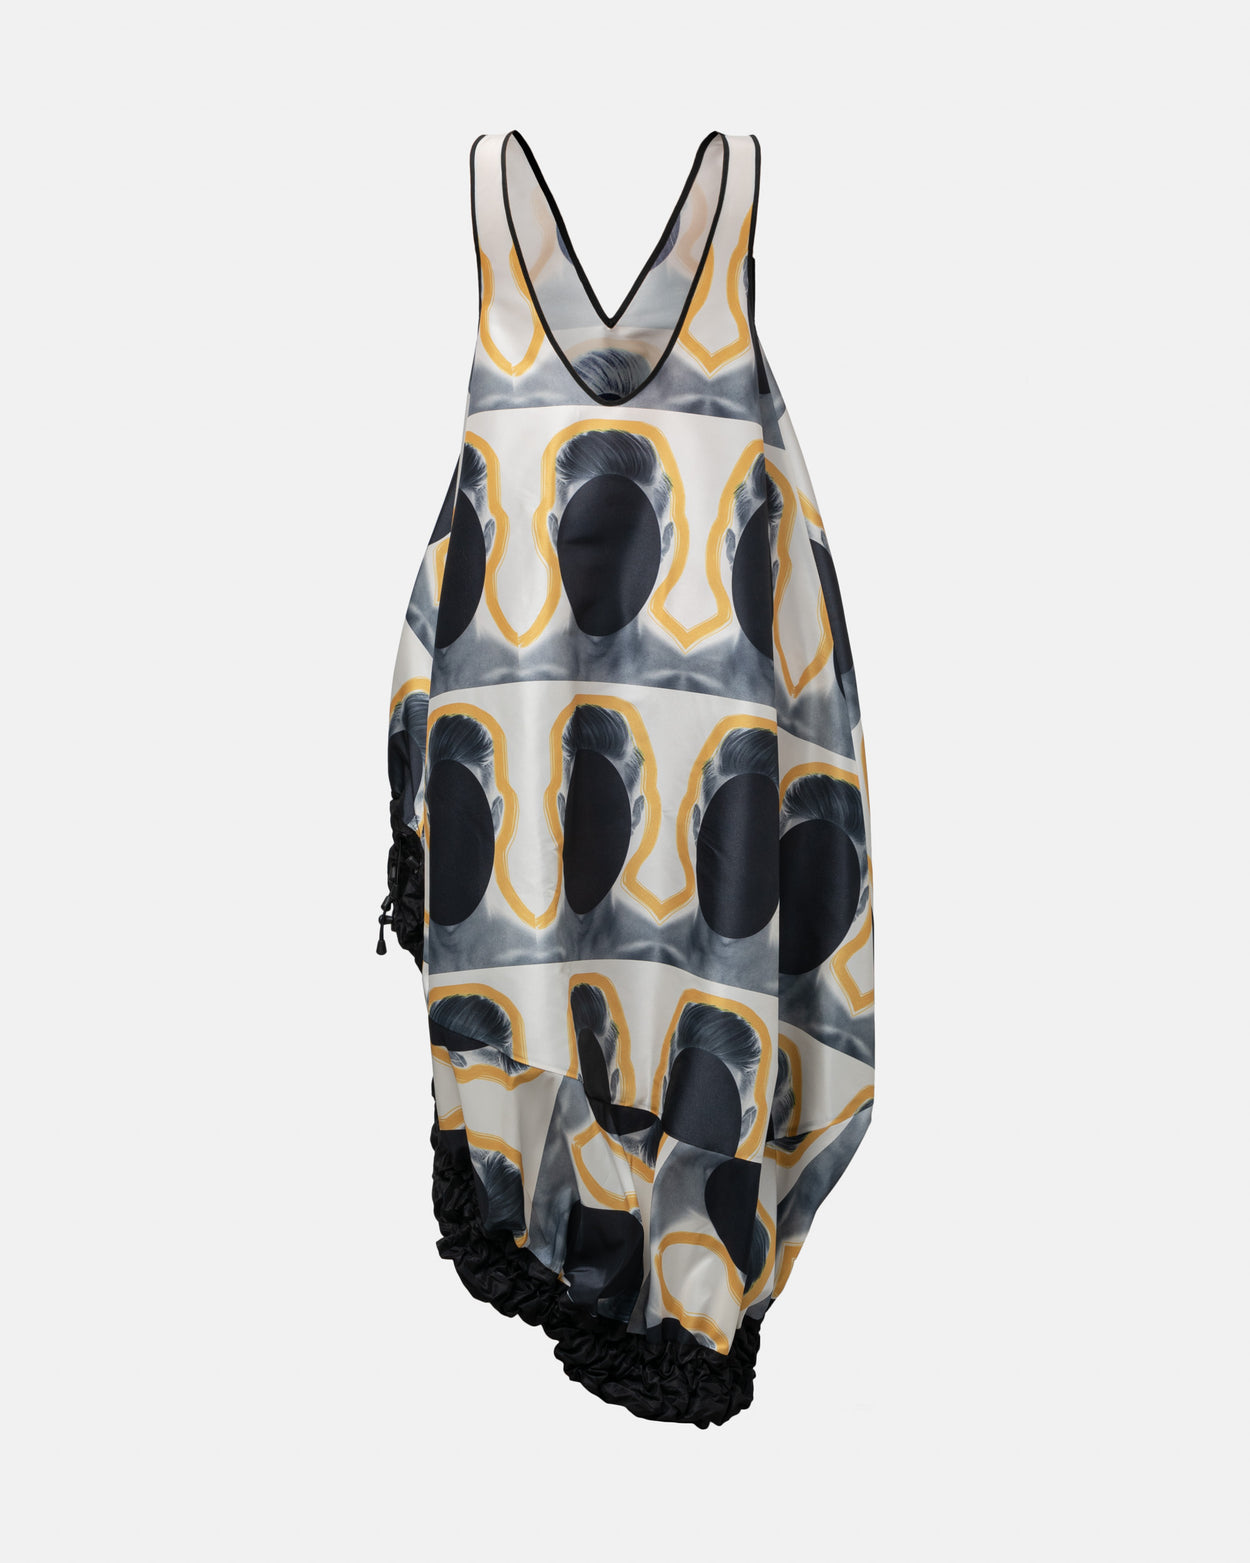 Invisible Face Print Gathered Dress with Taffeta Top by Ahmad Abdullatif